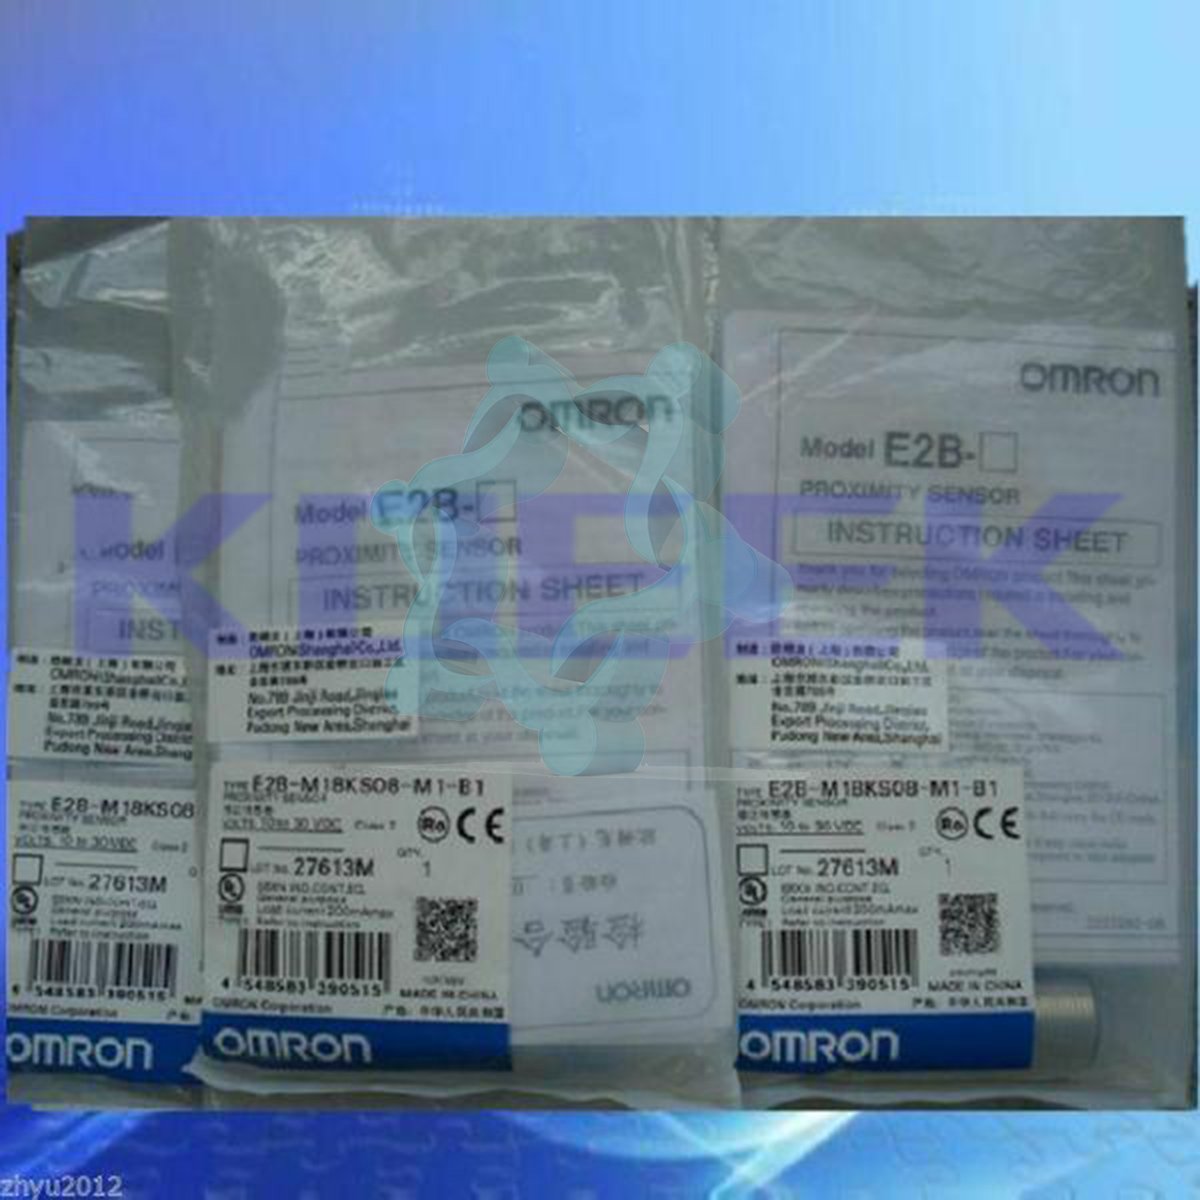 E2B-M18LS08-M1-B1 KOEED 101-200, 80%, import_2020_10_10_031751, Omron, Other